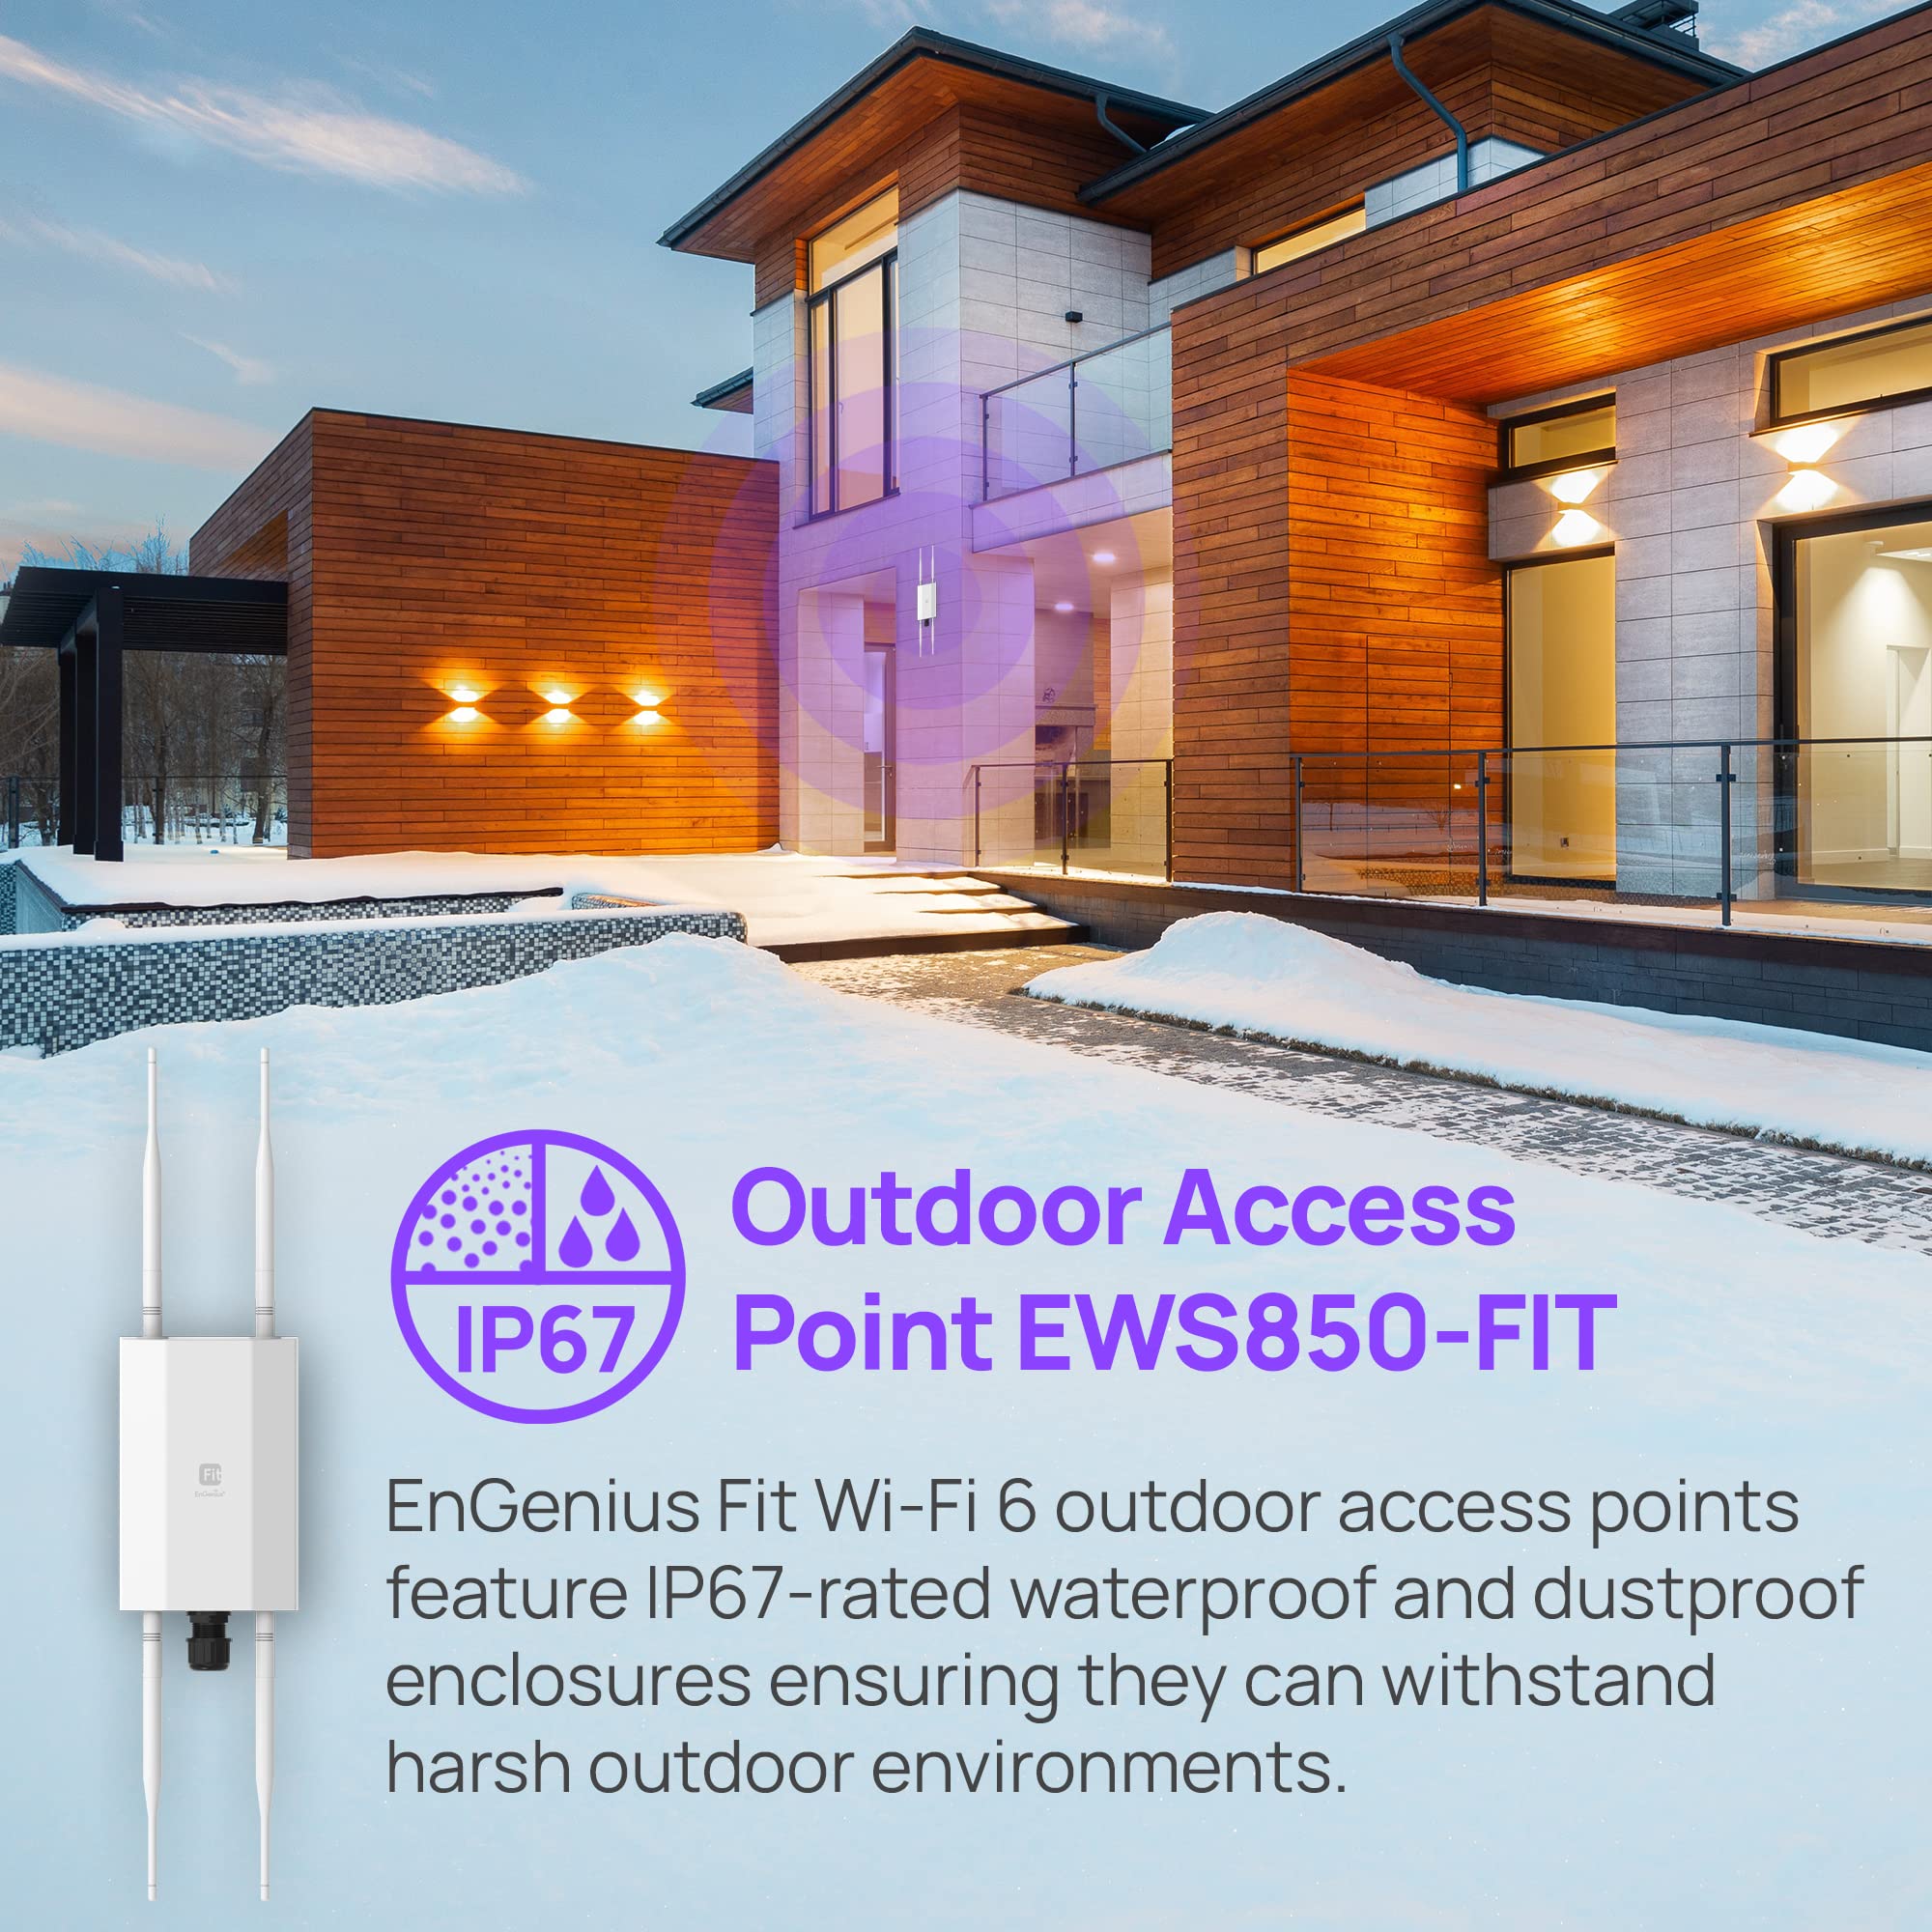 EnGenius Fit Managed EWS850-FIT Wi-Fi 6 (11ax) 2x2 Outdoor Access Point